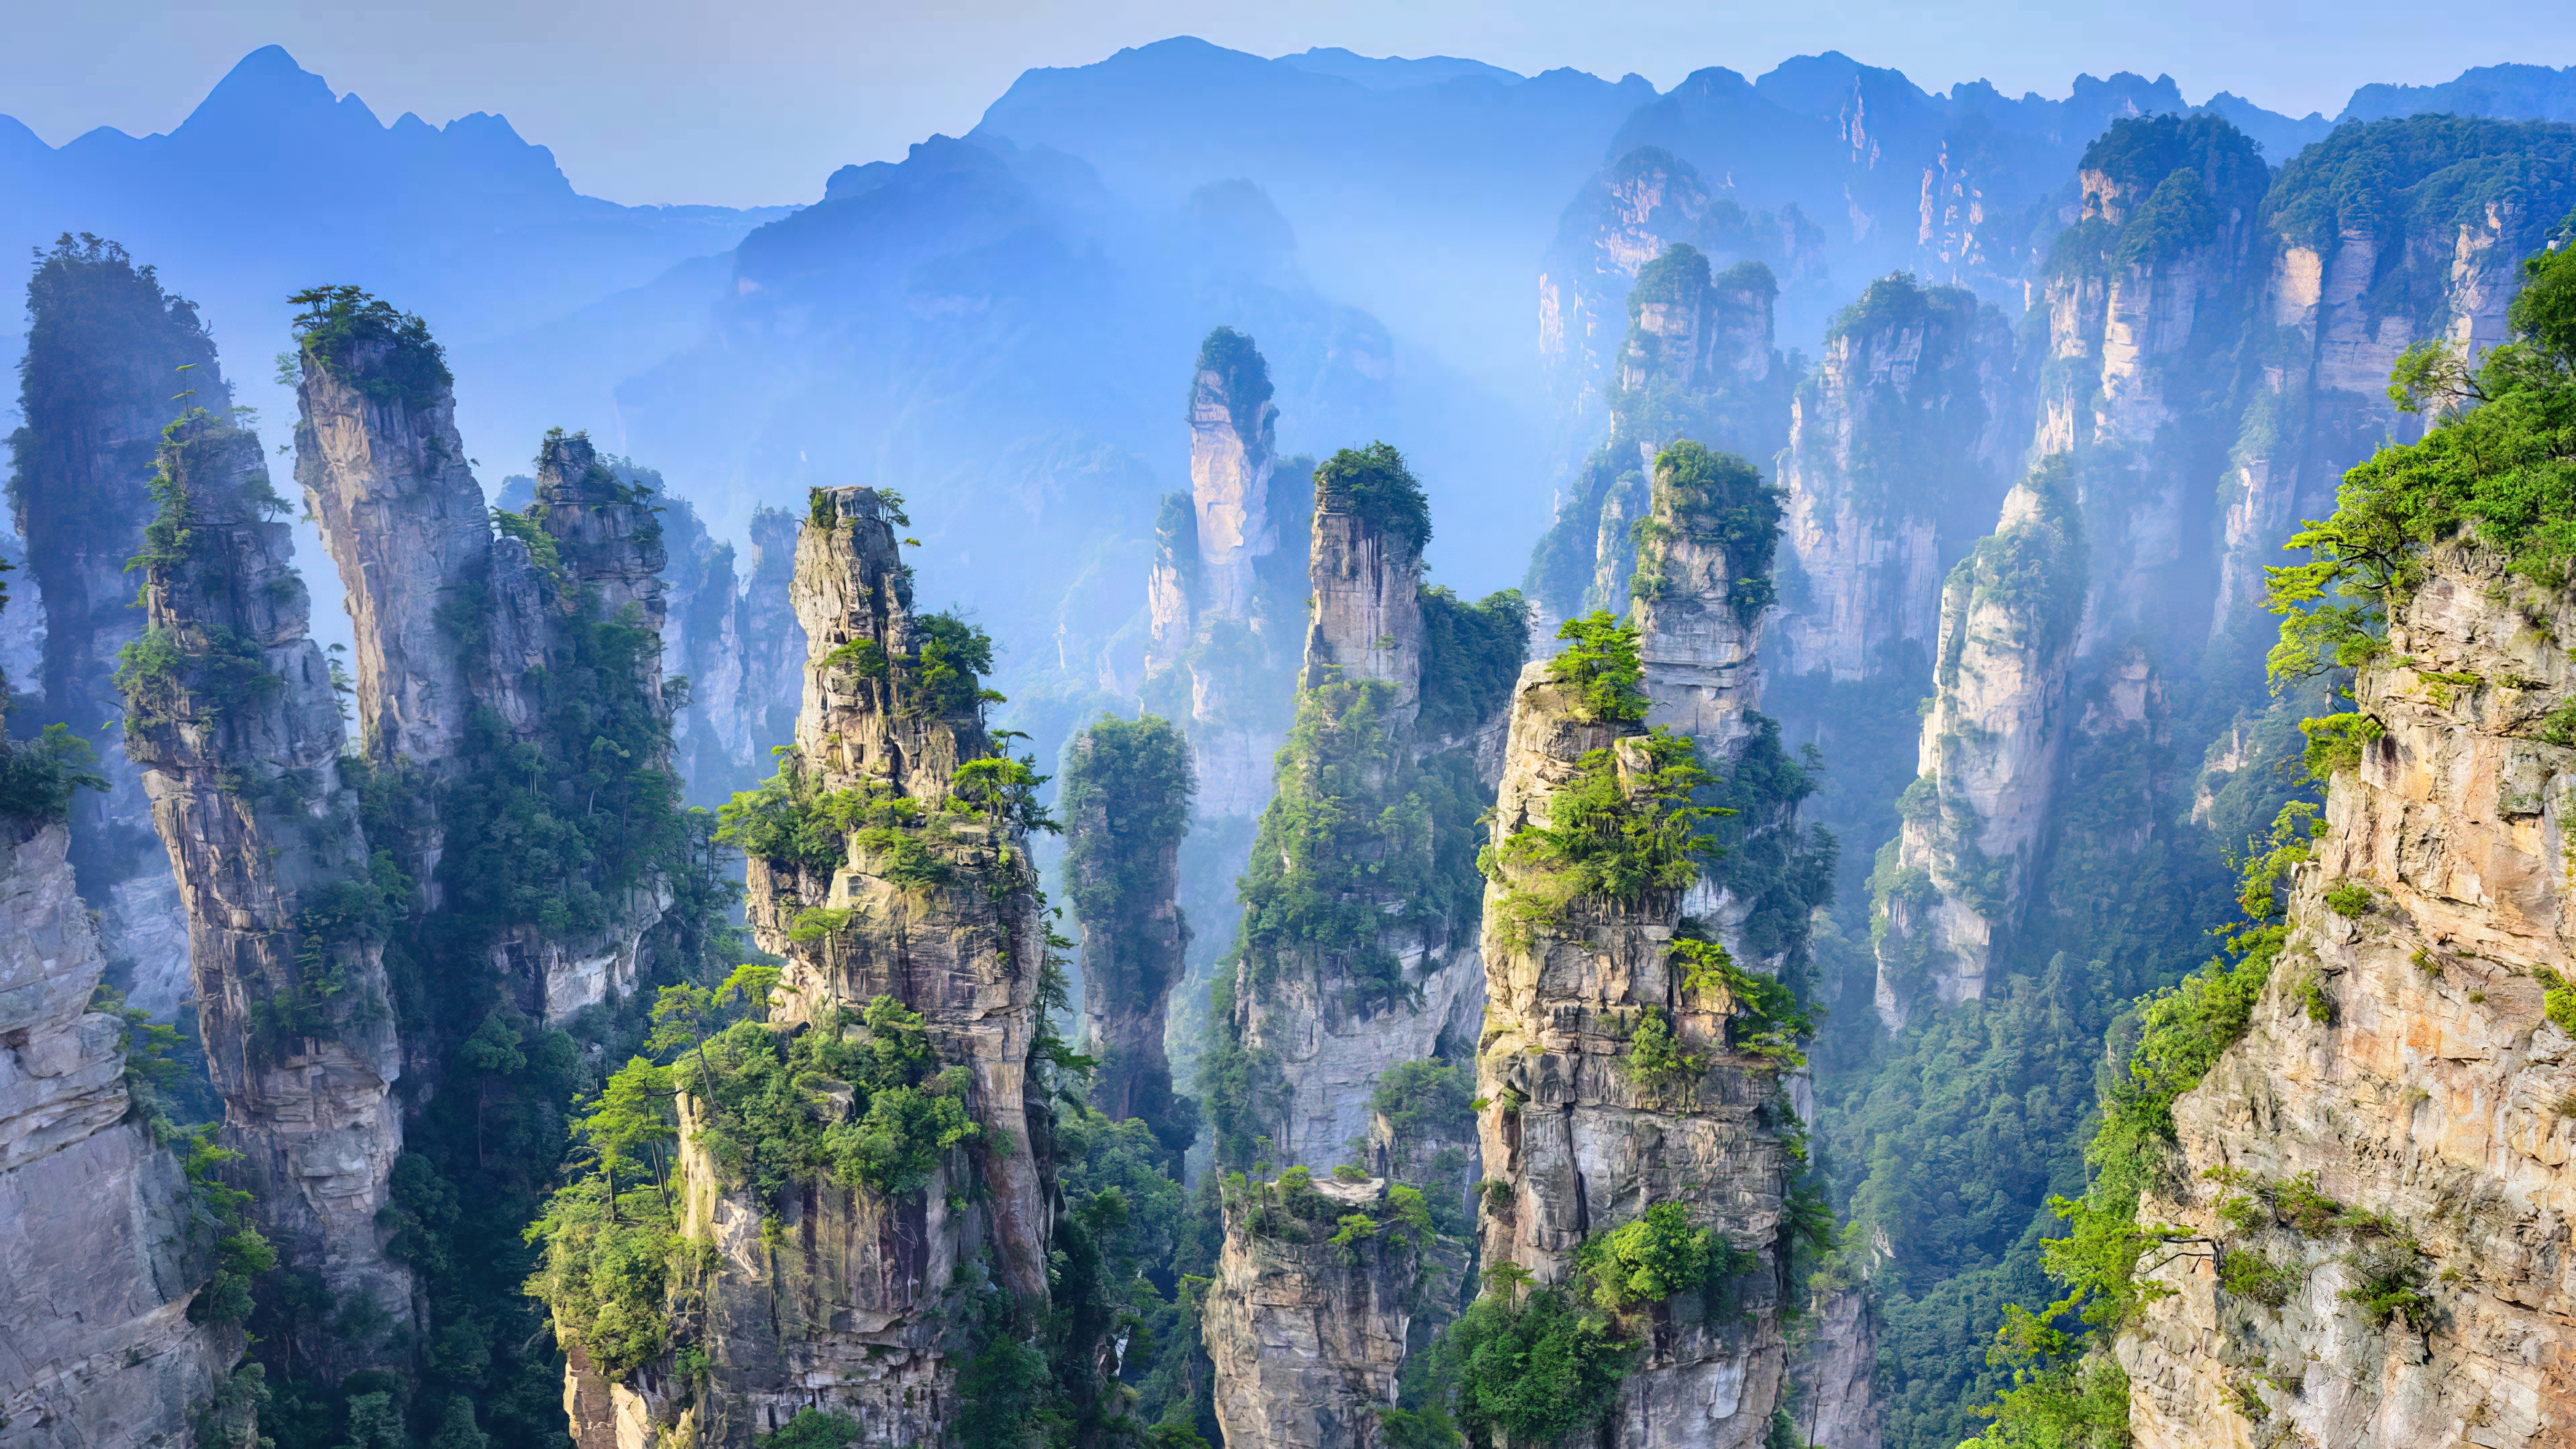 General 3840x2160 mountains Basin Mountain nature World Heritage Site Heritage Asia Hunan Zhangjiajie National Park  clear sky China landscape trees clouds cliff